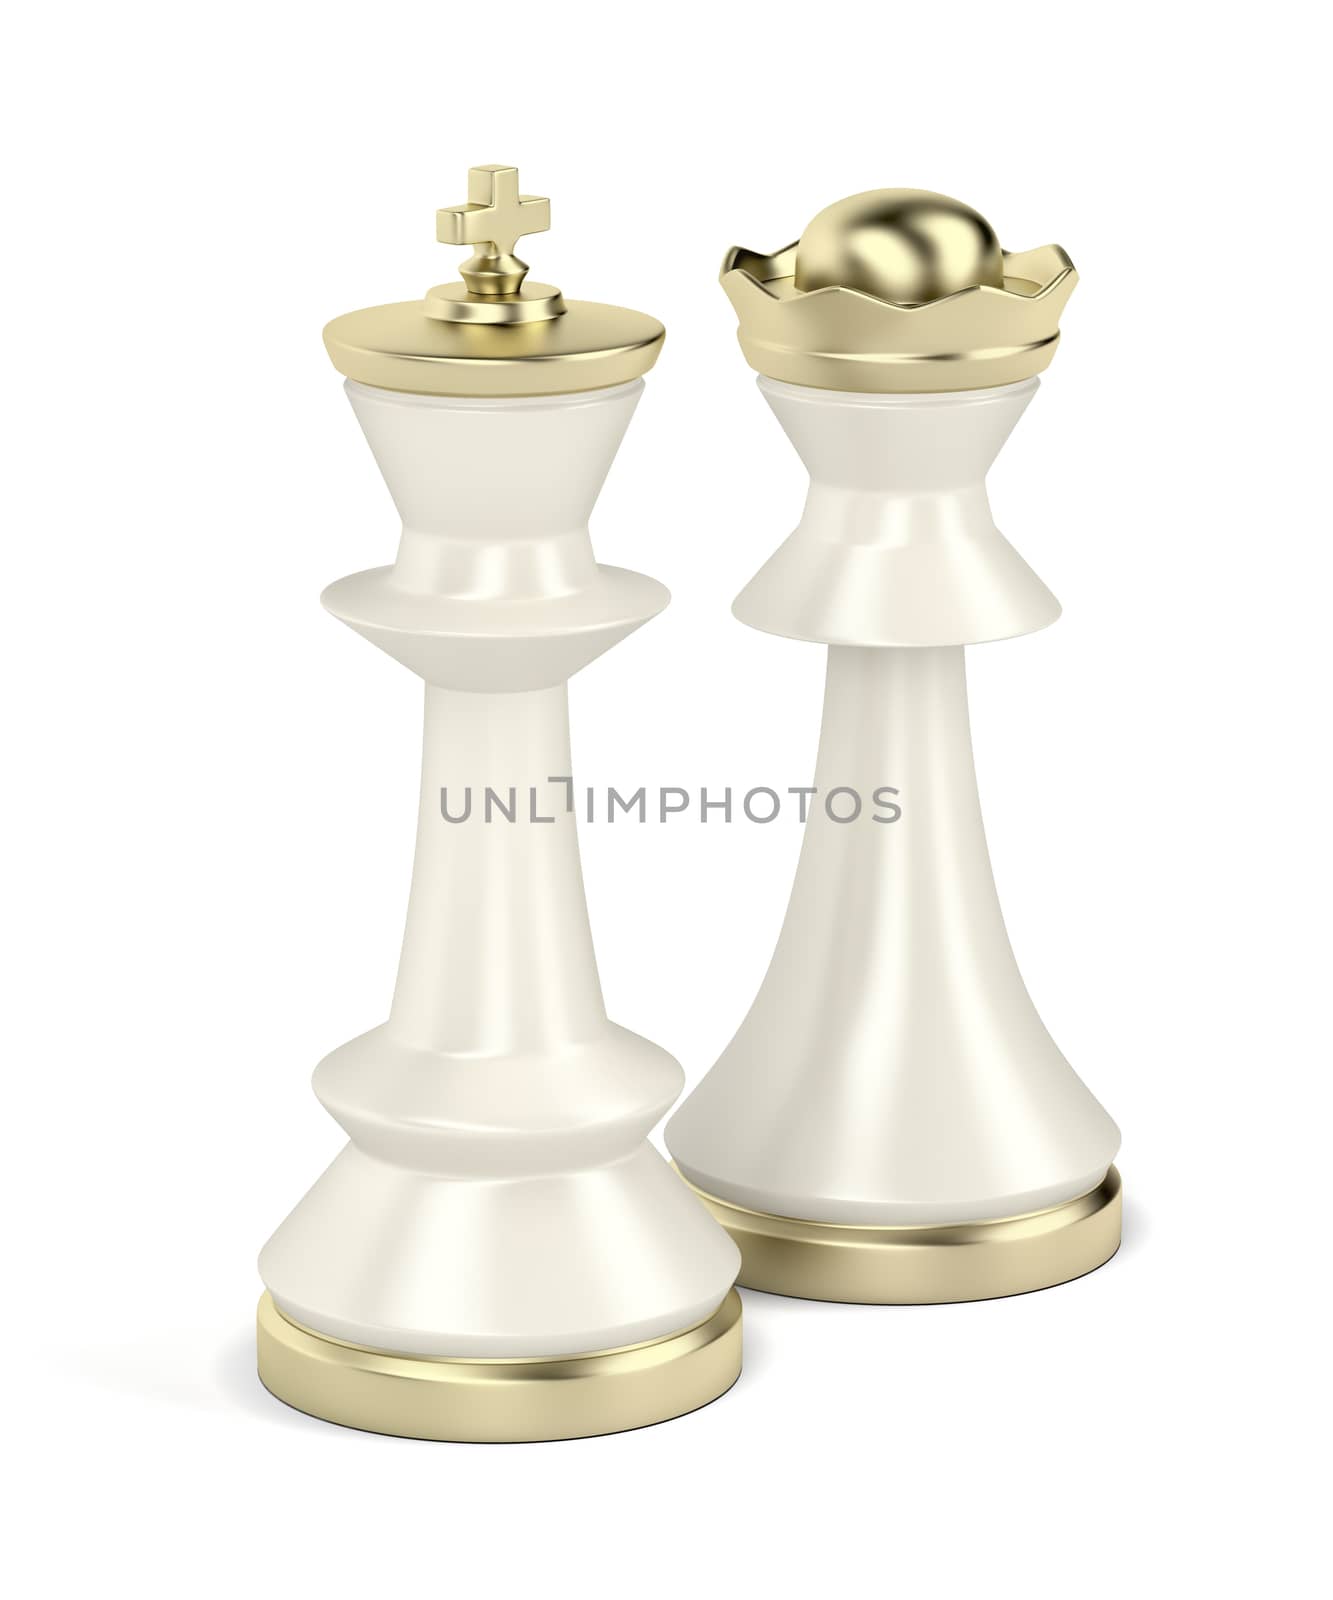 White king and queen chess pieces on white background